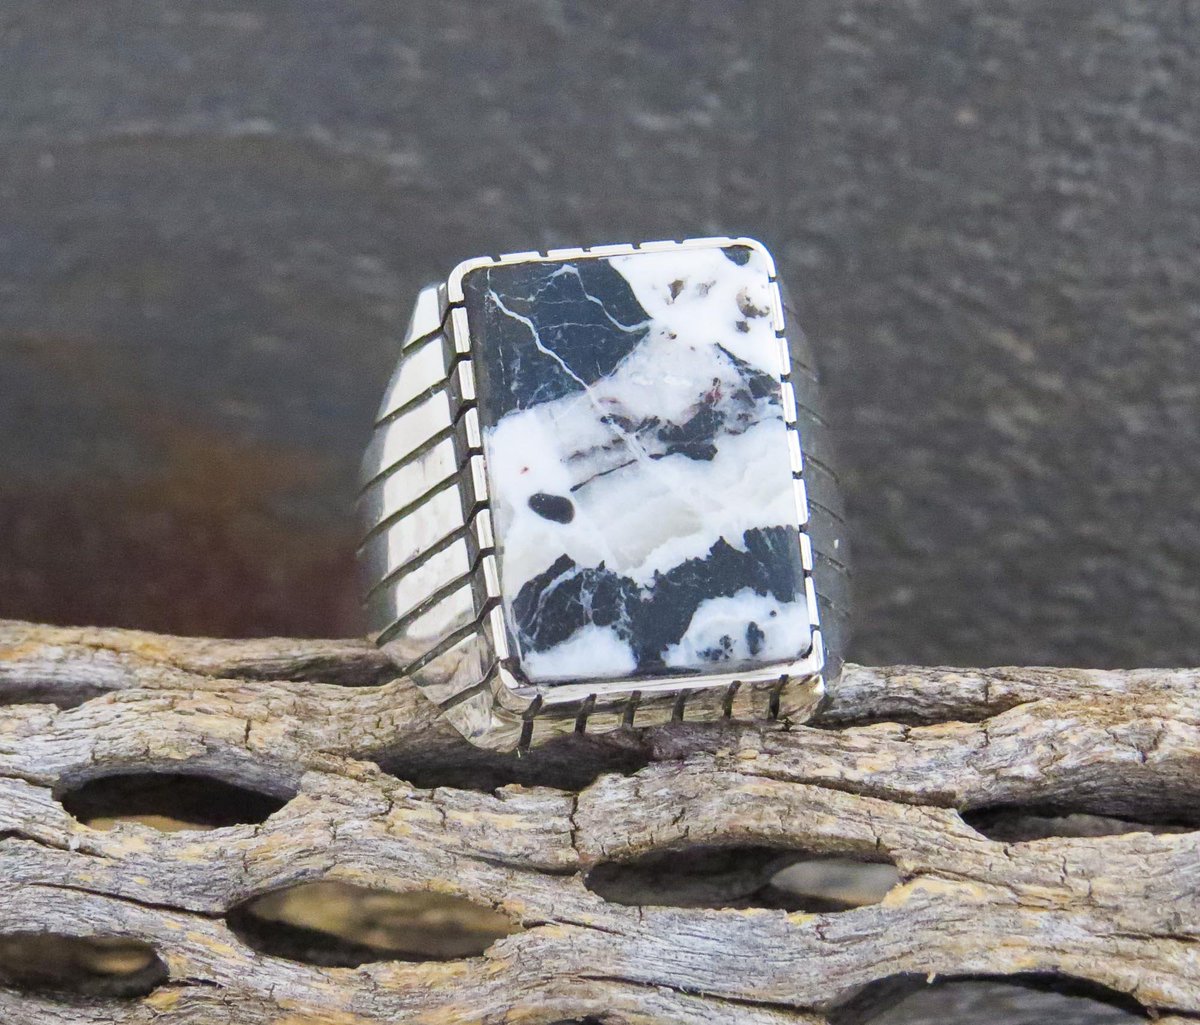 Masculine in Black and White #etsy shop: Men's Native American White Buffalo Turquoise Sterling Silver Ring etsy.me/2PqD5AM #jewelry #ring #white #silver #black #turquoise #southwestern #mensblackring #westernring #mensring #whitebuffalo #mensjewelry #gift